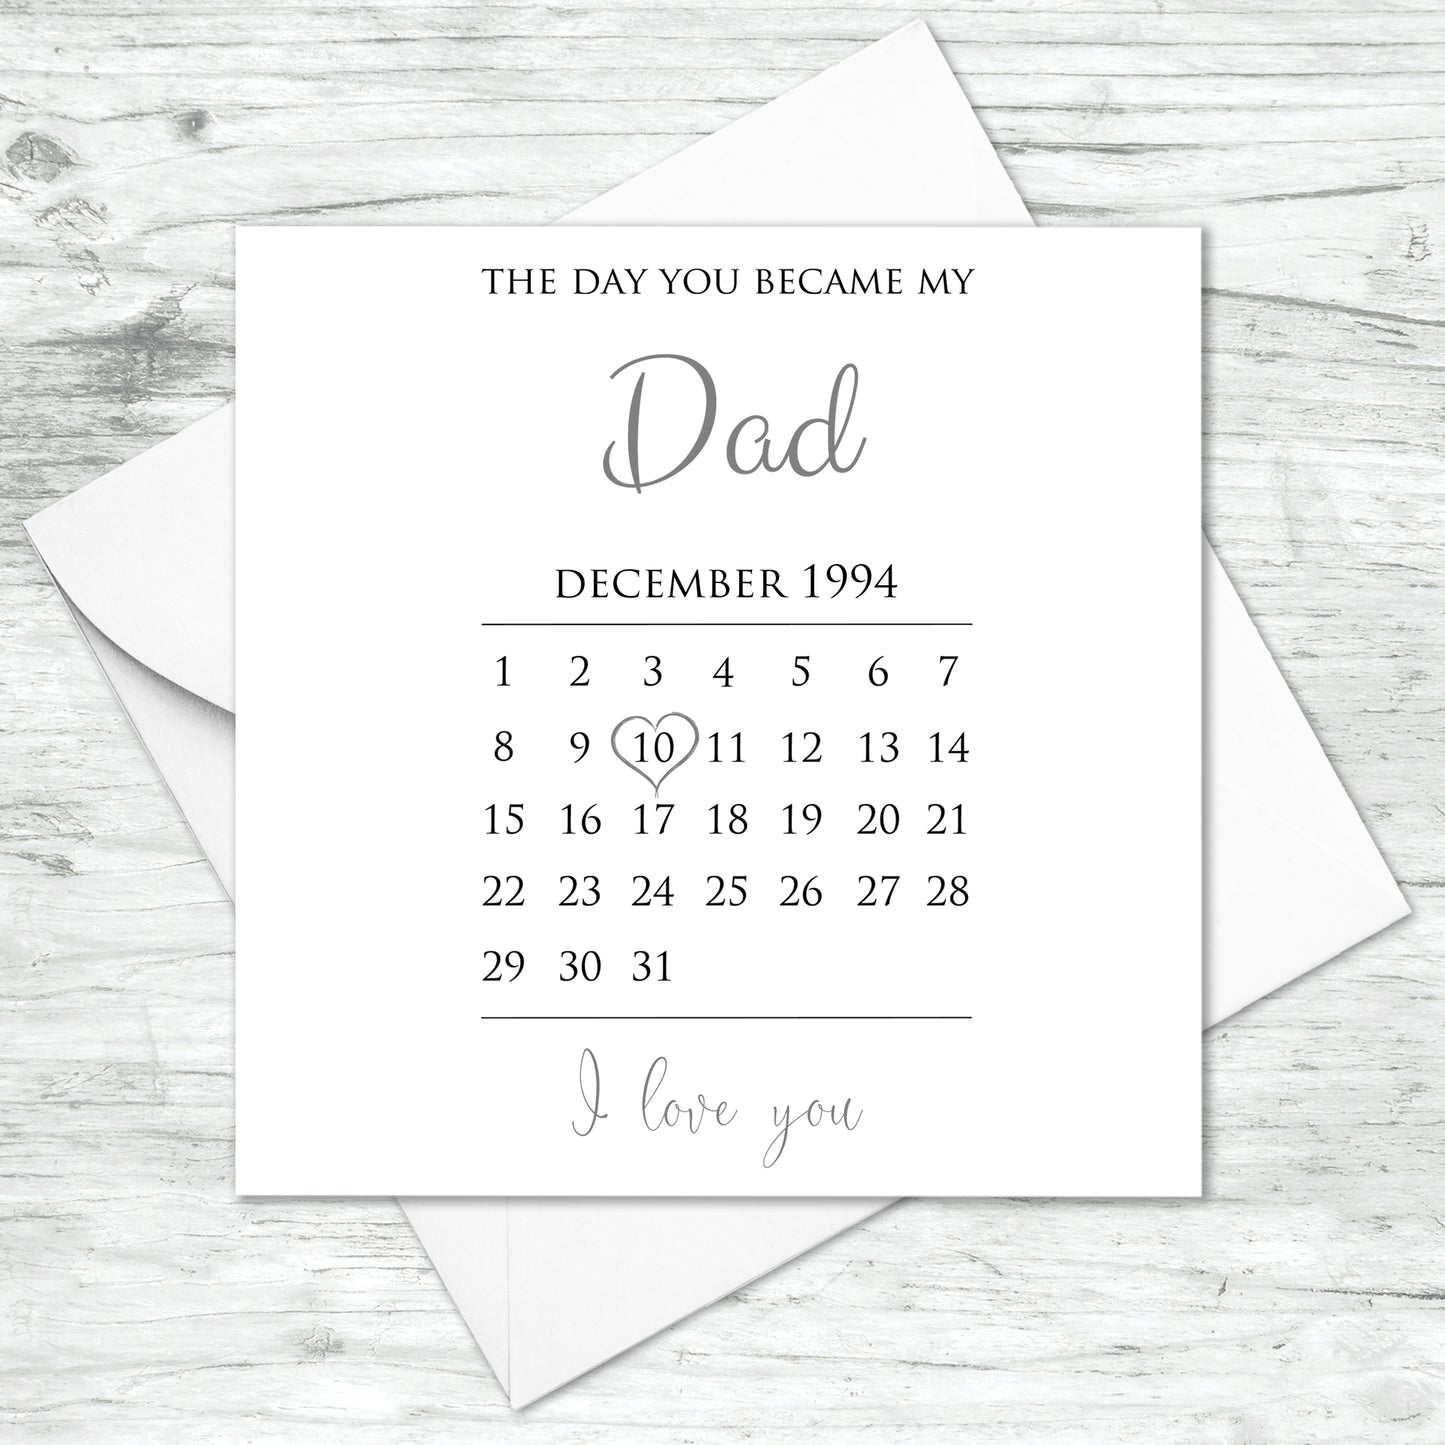 Personalised The Day You Became My Dad Calendar Card